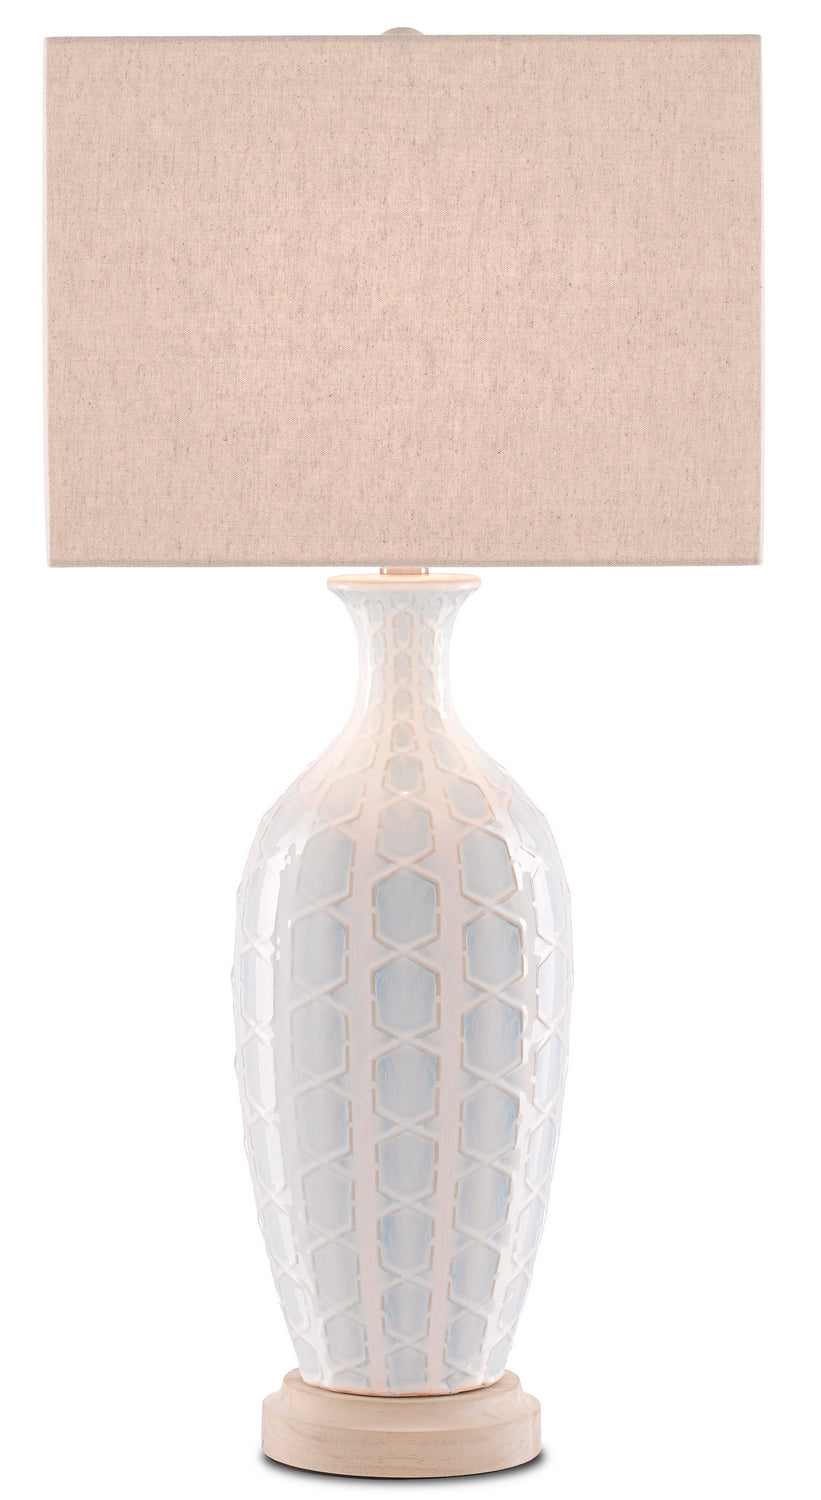 One Light Table Lamp from the Saraband collection in Sky Blue/Cream finish